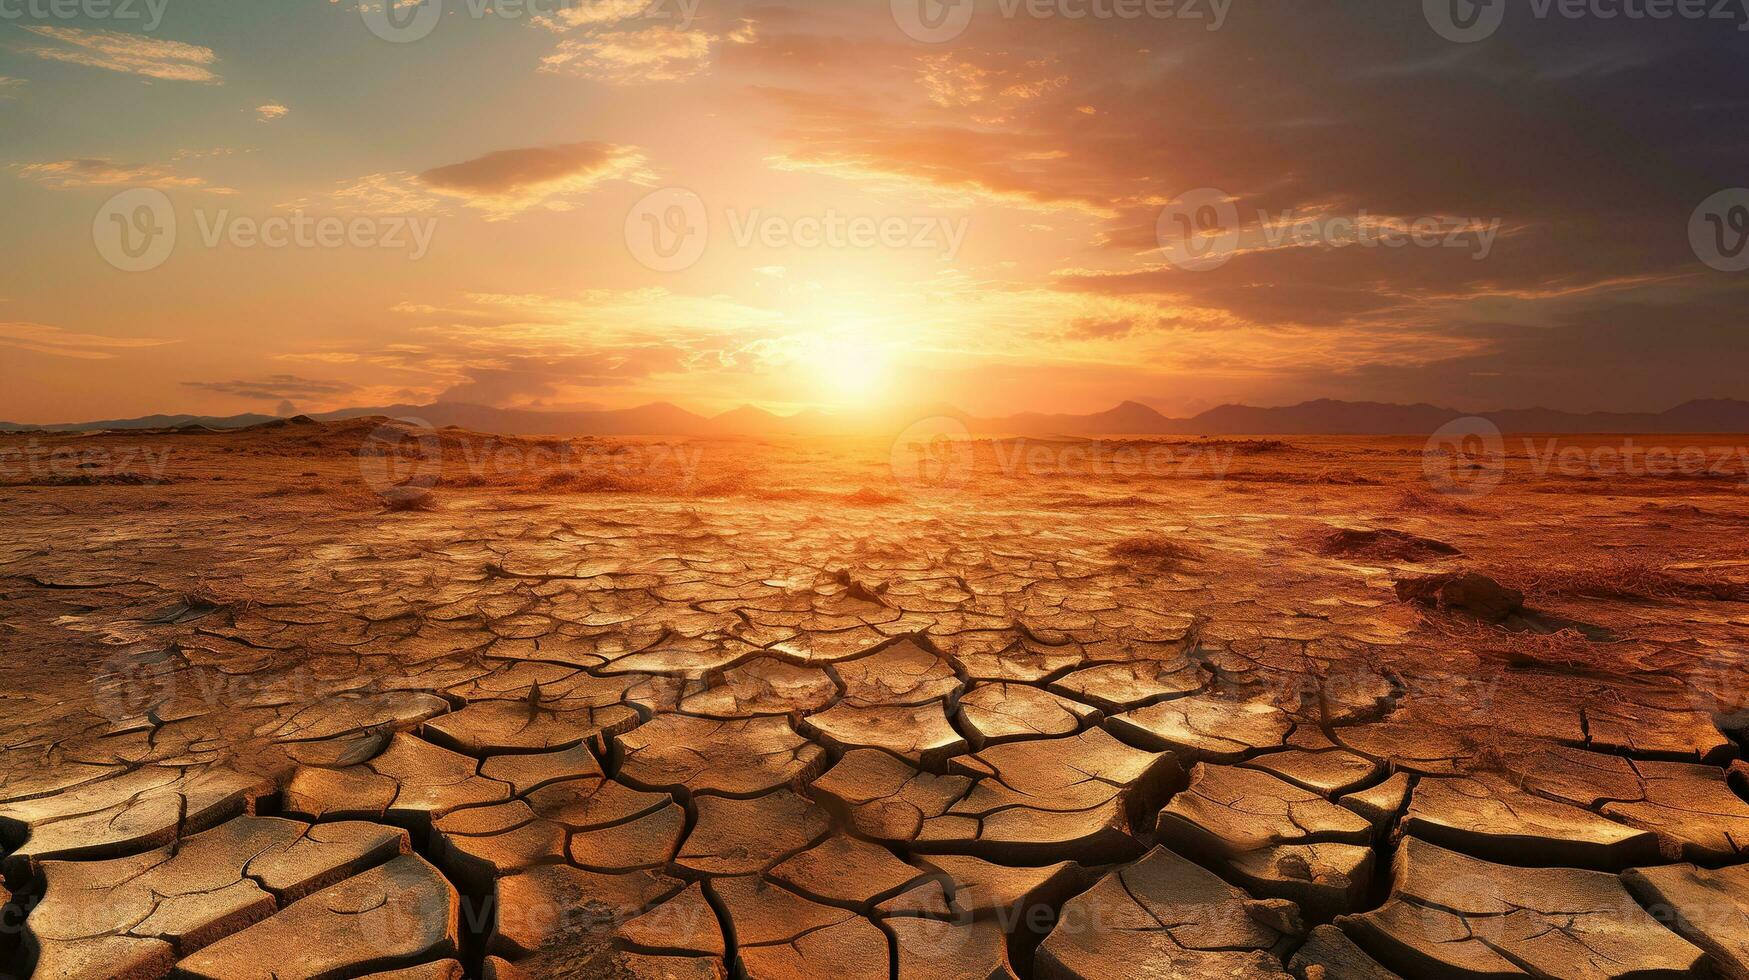 Stunning sunset over a dried out field. The golden sun casts a warm glow over the cracked earth, creating a dramatic and beautiful scene. Generative AI photo